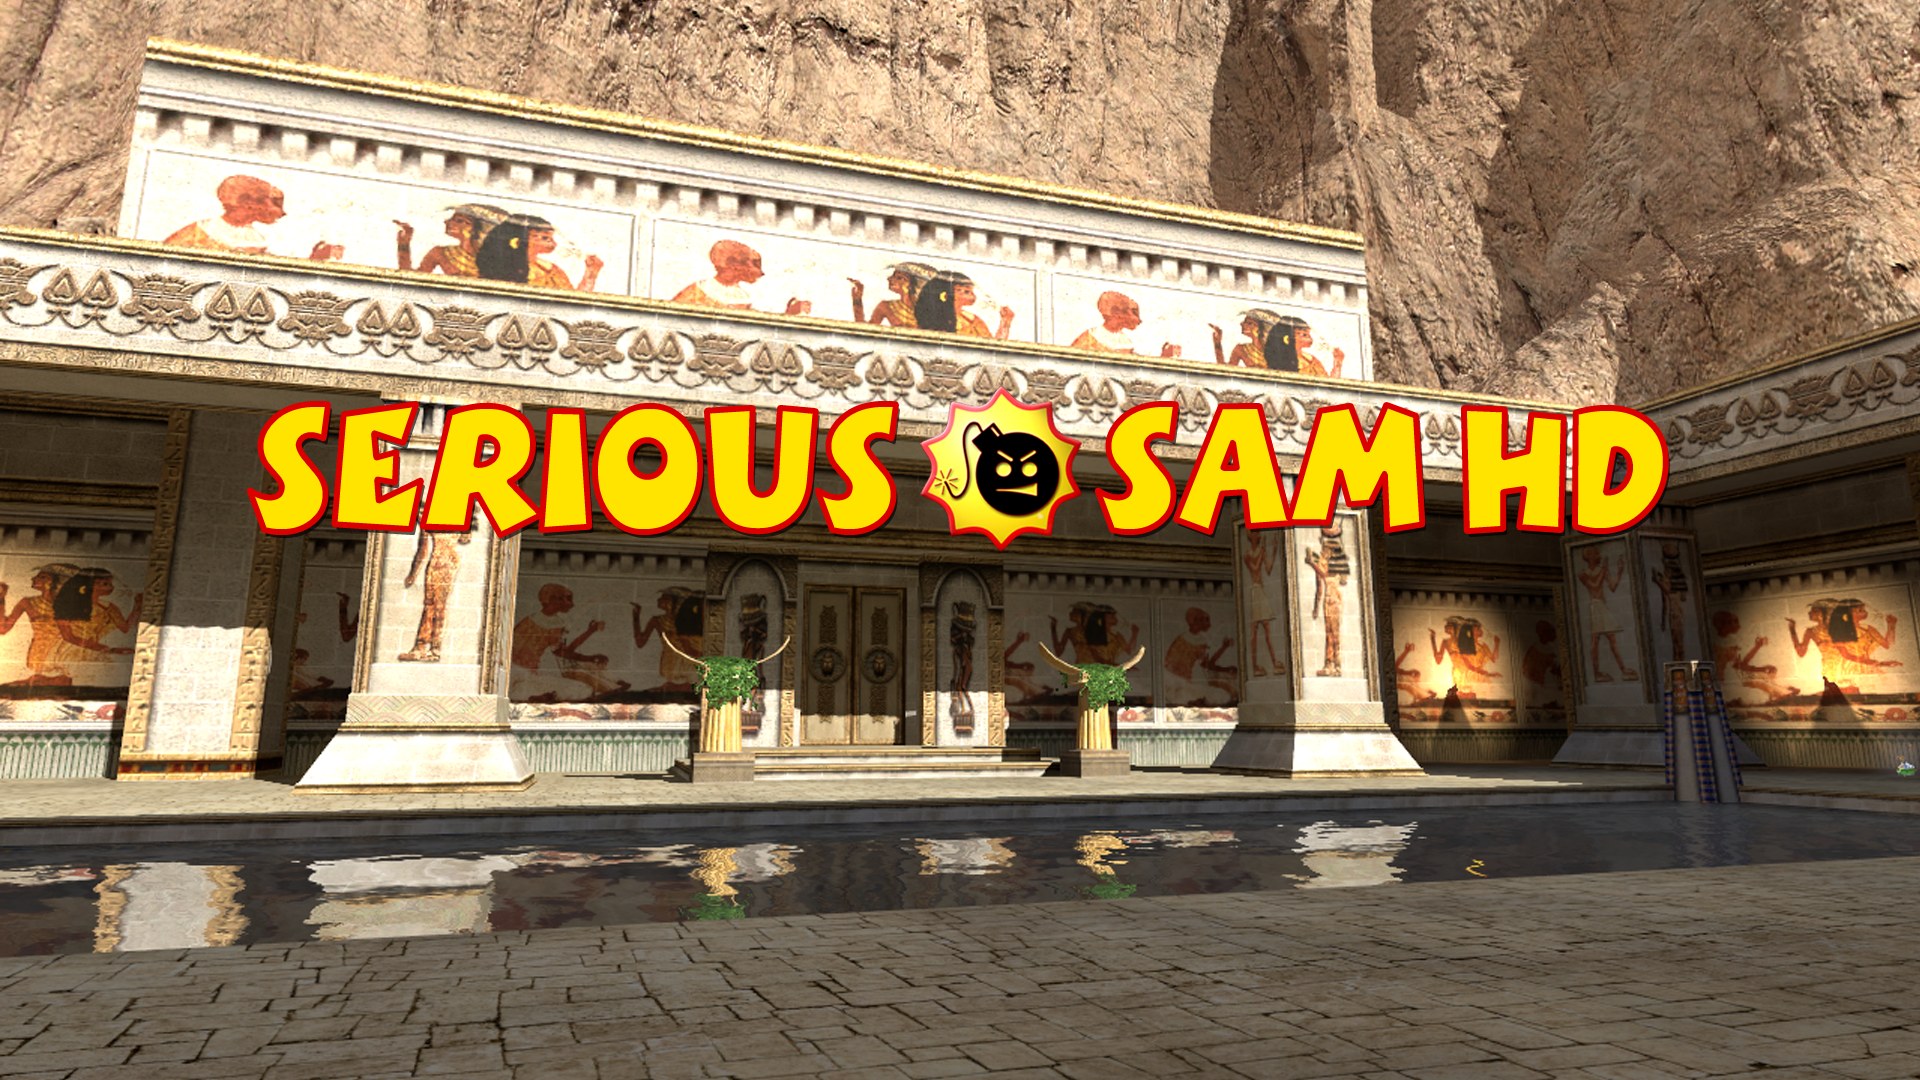 Popular Serious Sam Hd: The First Encounter Image for Phone